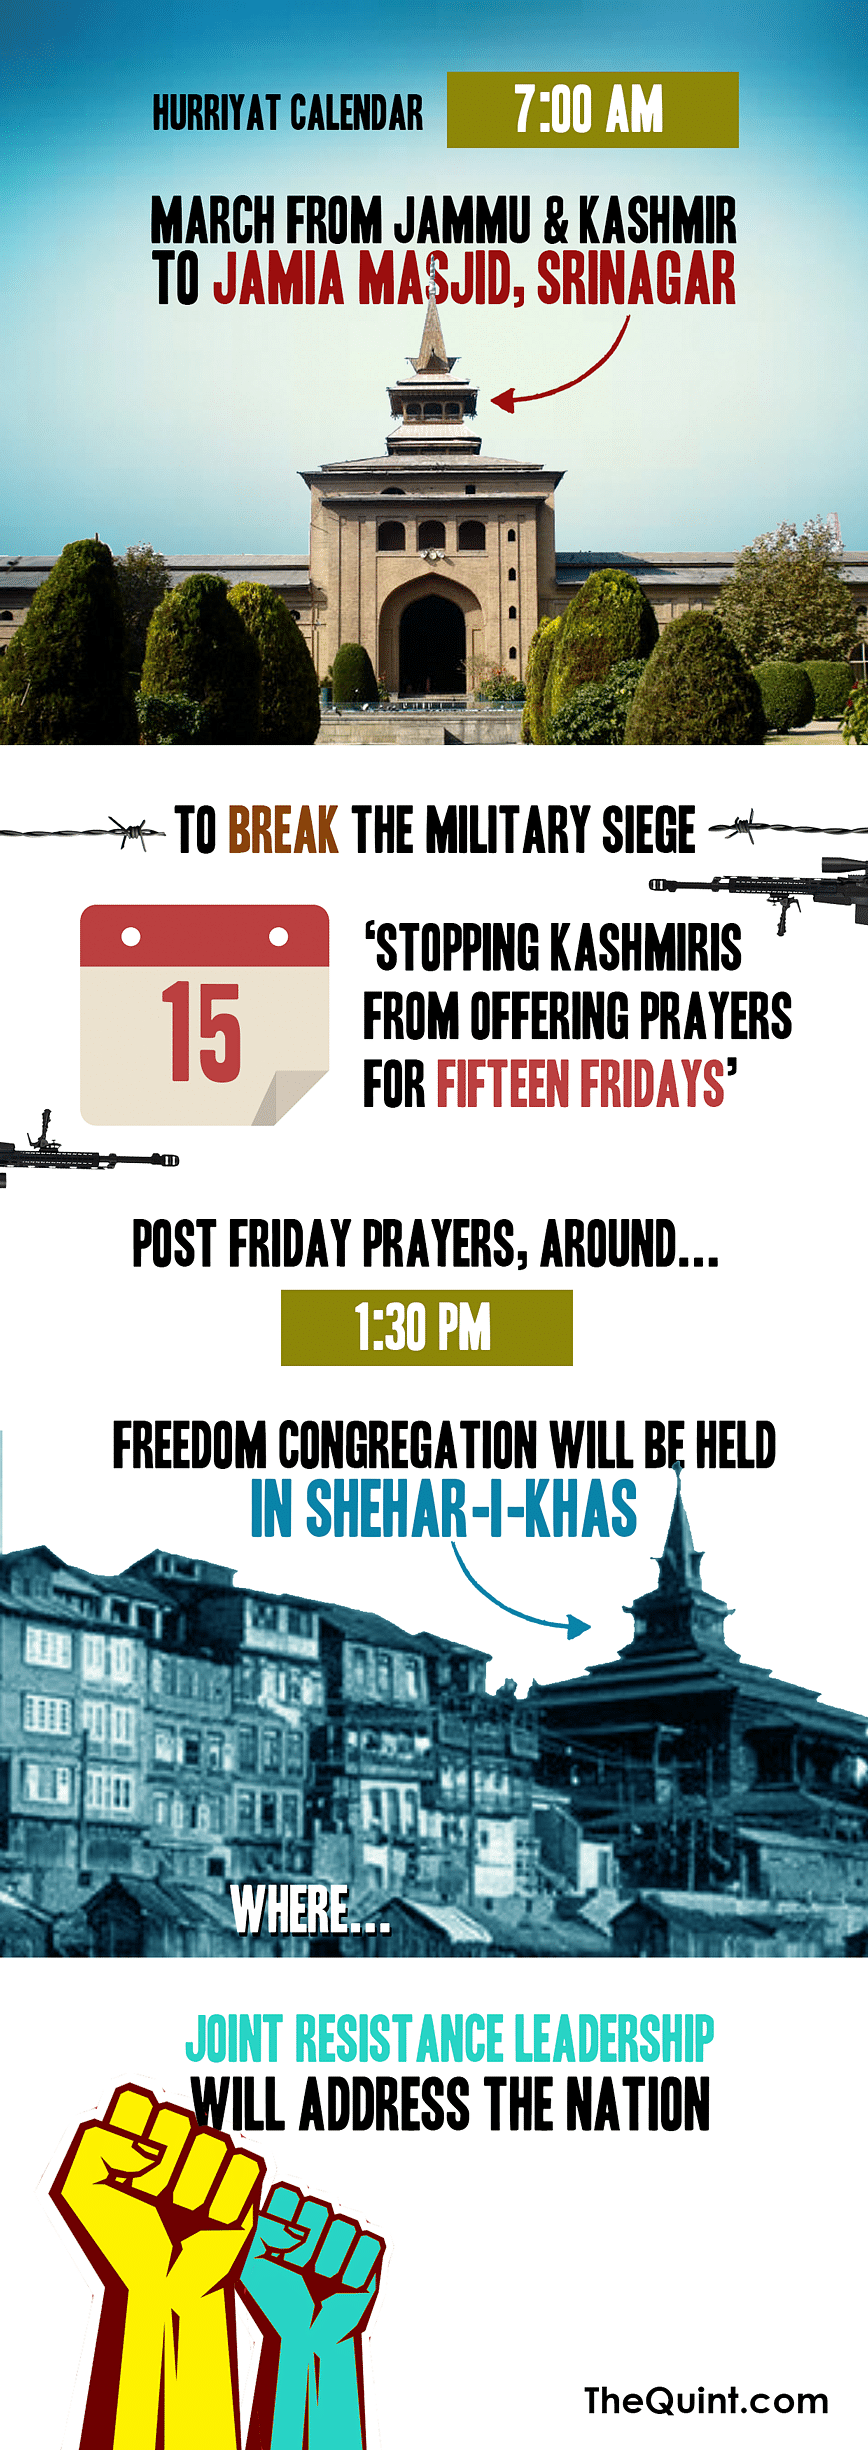 Hurriyat calls to march to Jamia Masjid in Srinagar to break military siege. It has been closed for 15 weeks.